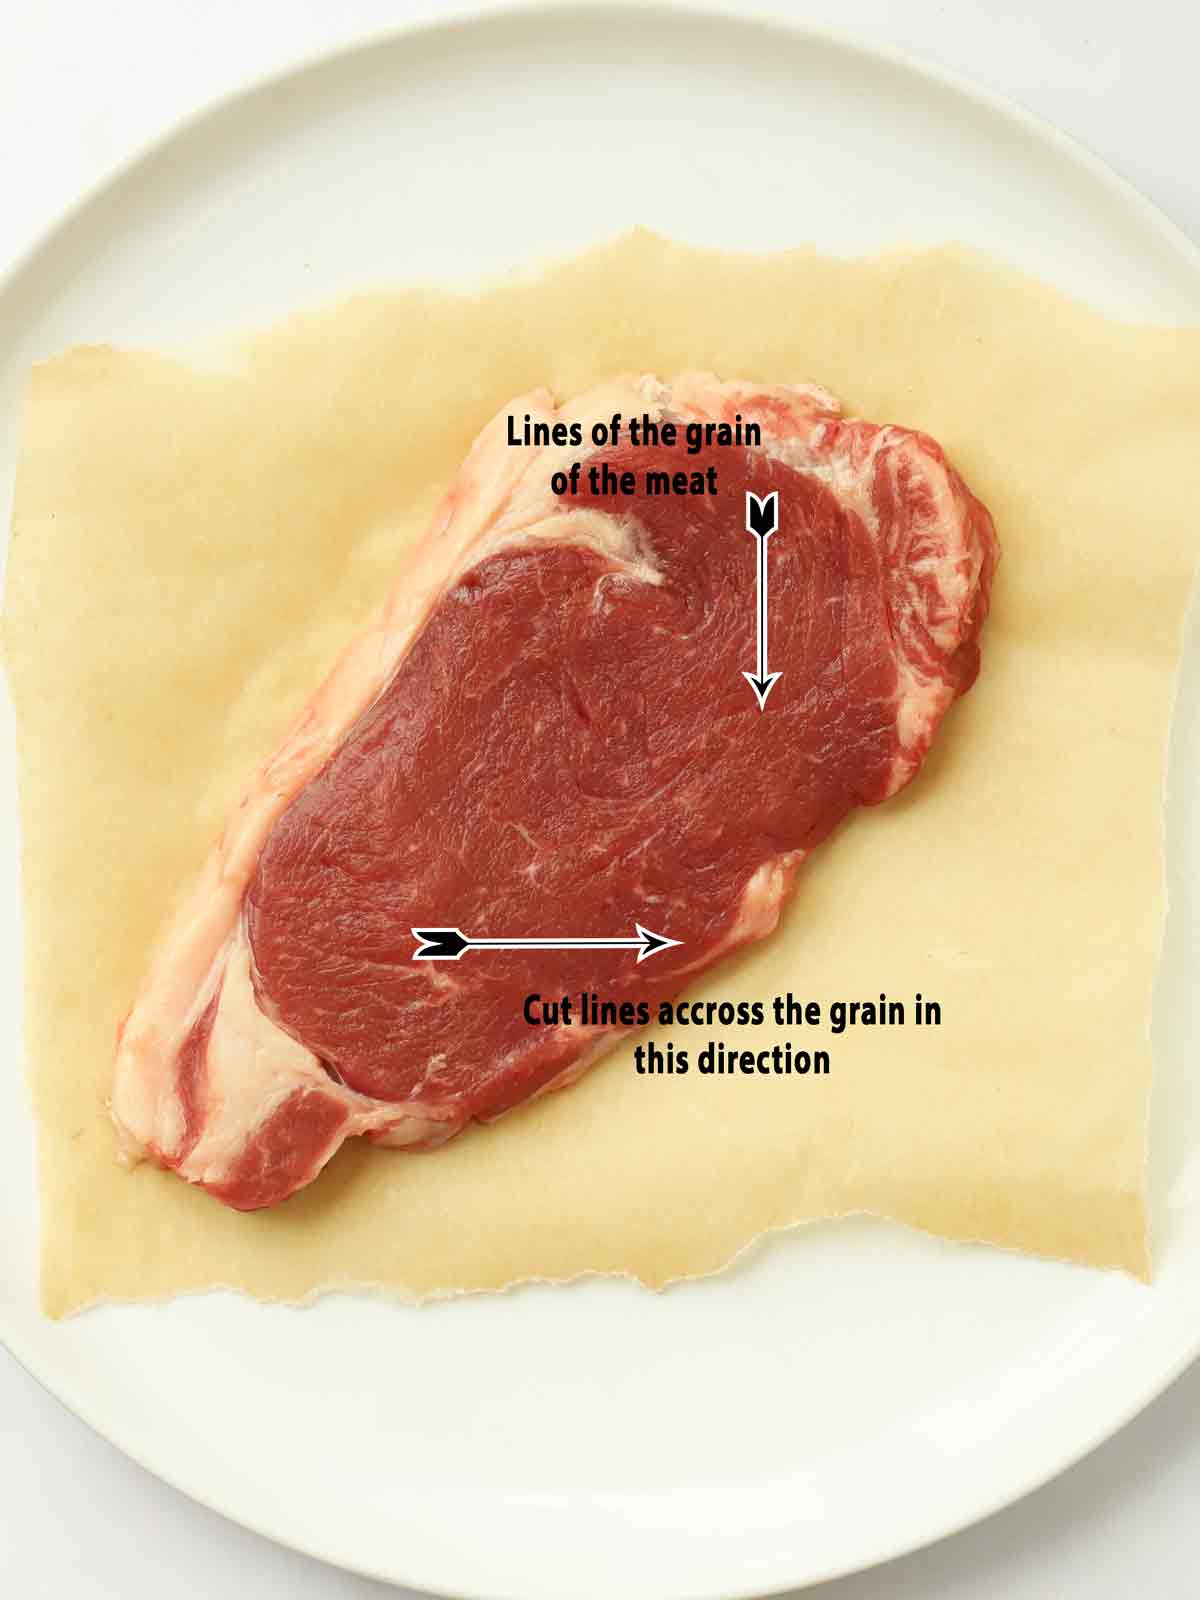 Raw steak showing how to cut meat against the grain.